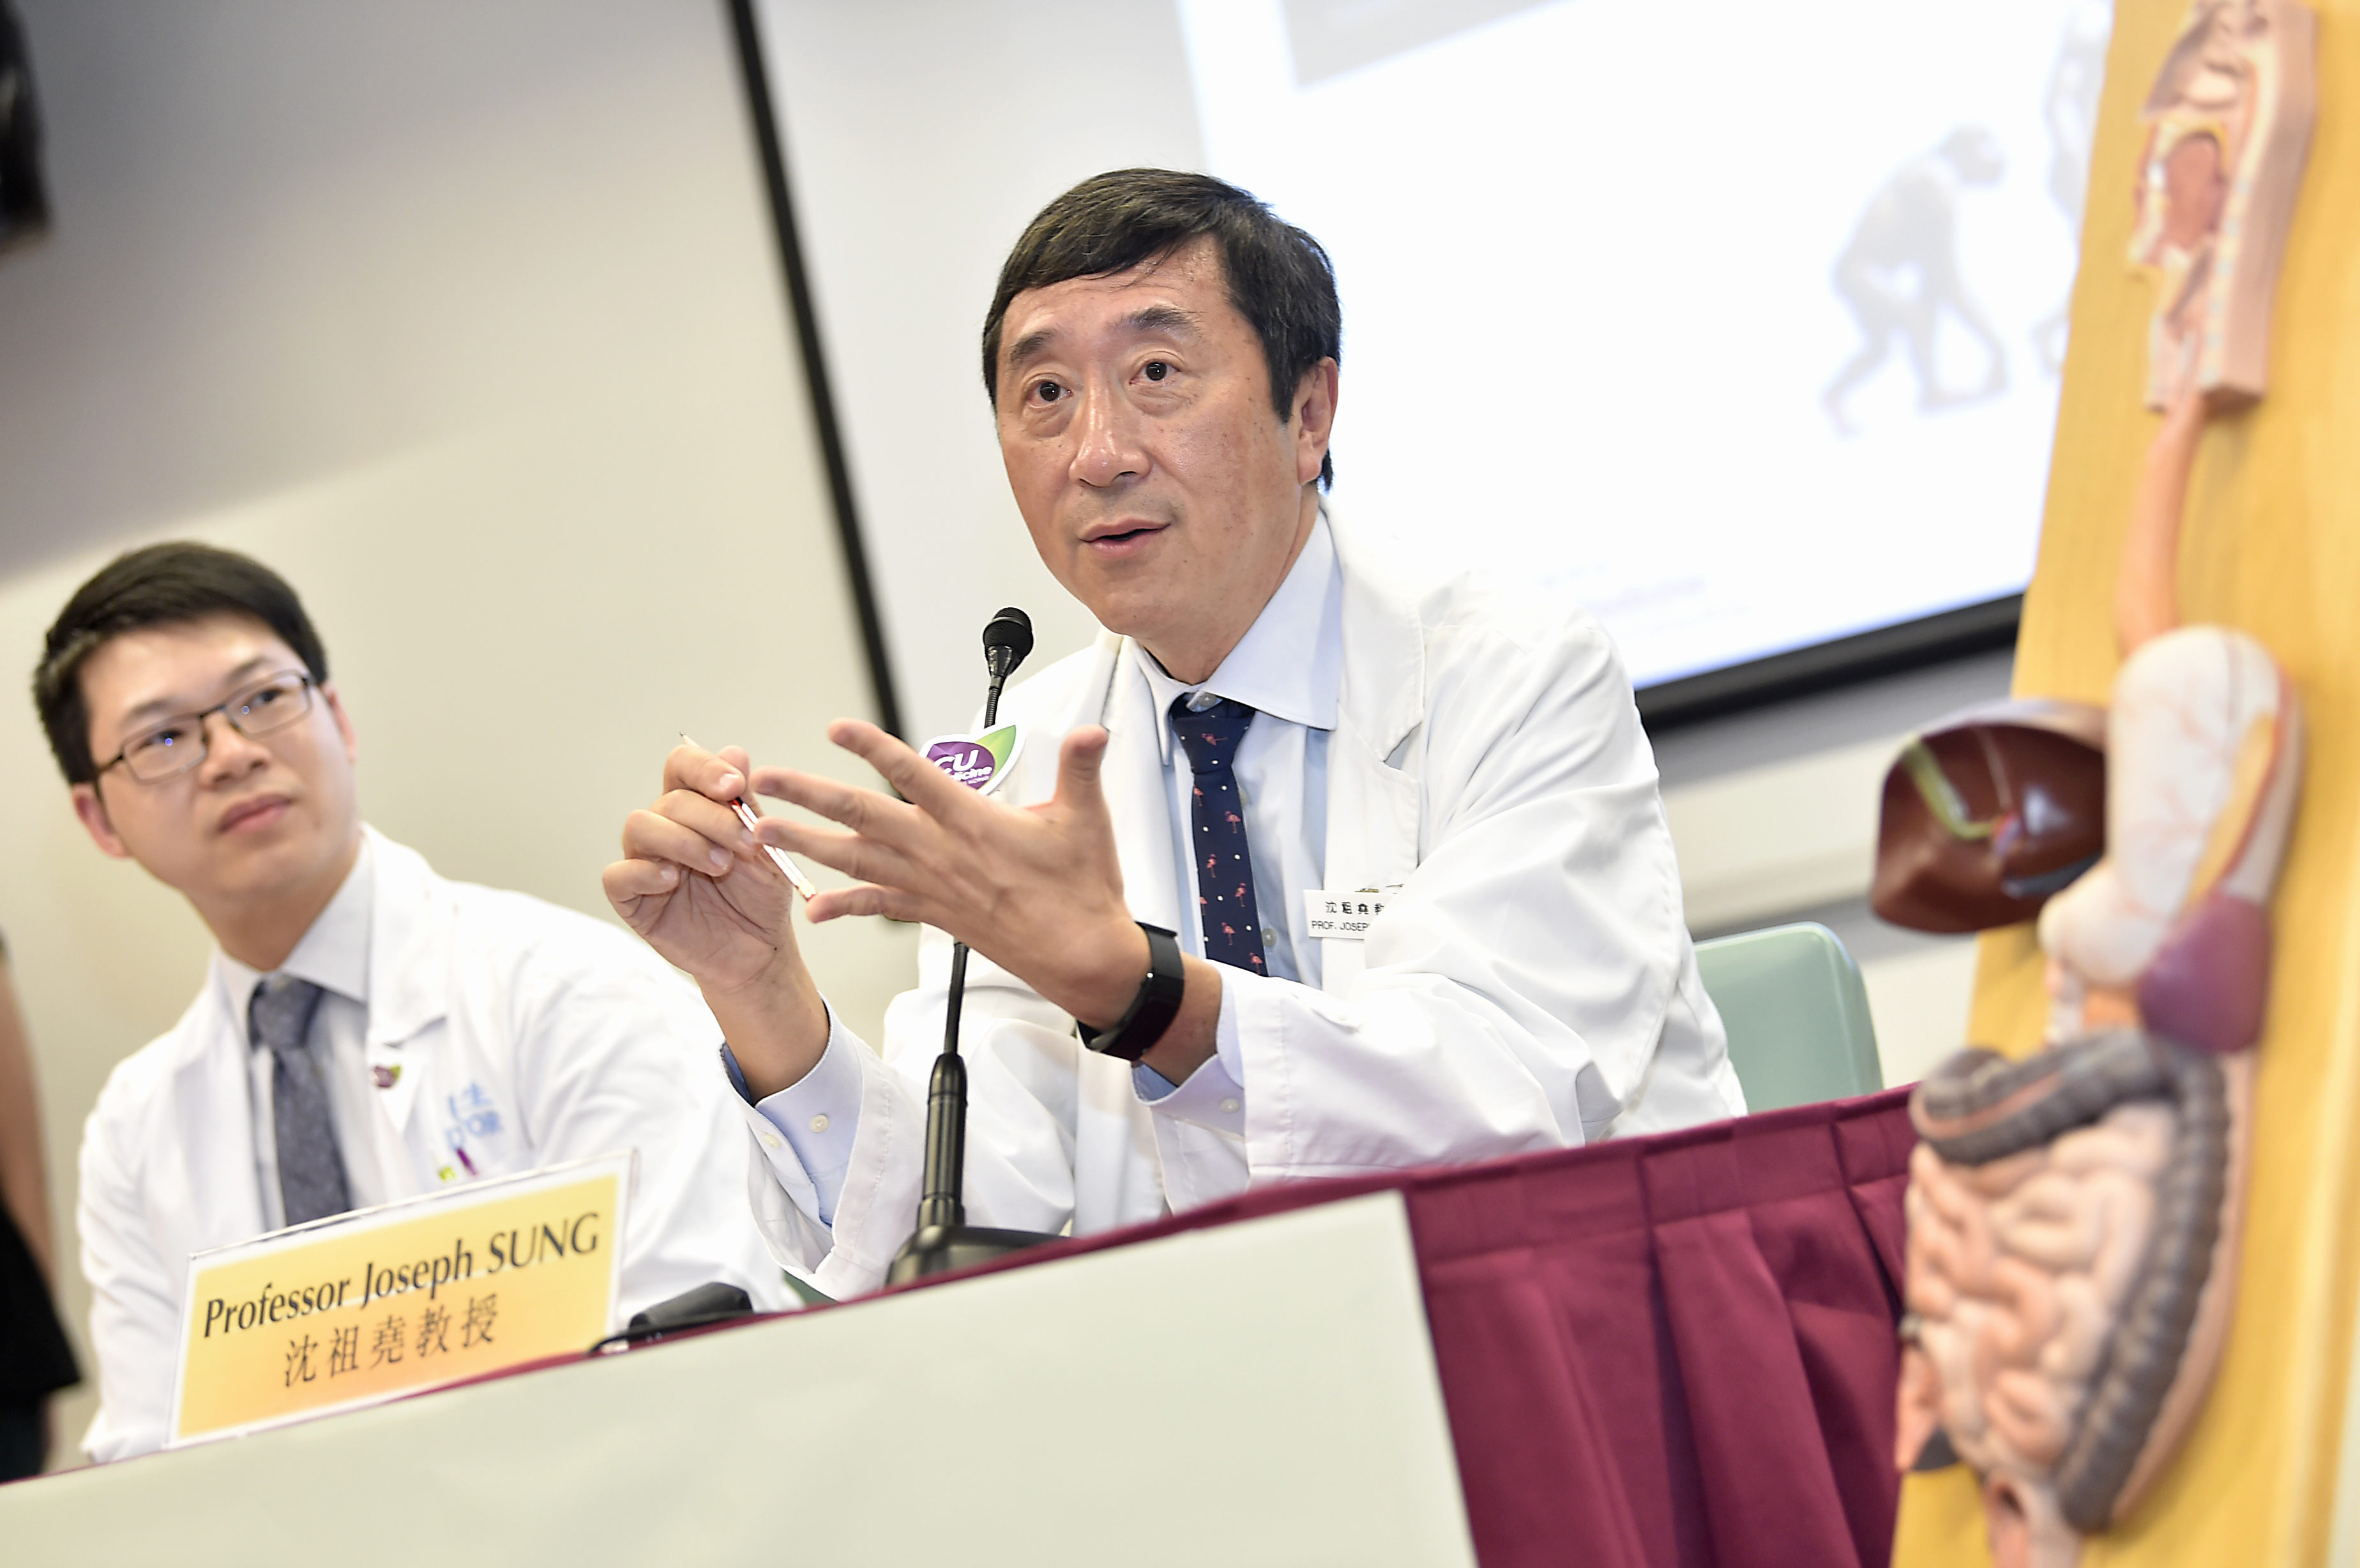 Professor Joseph SUNG pointed out that age, gender, smoking, obesity and family history are the five factors related to the risk of developing colorectal cancer. The research team will continue to look into the causes of the “young-shift” in colorectal cancer.